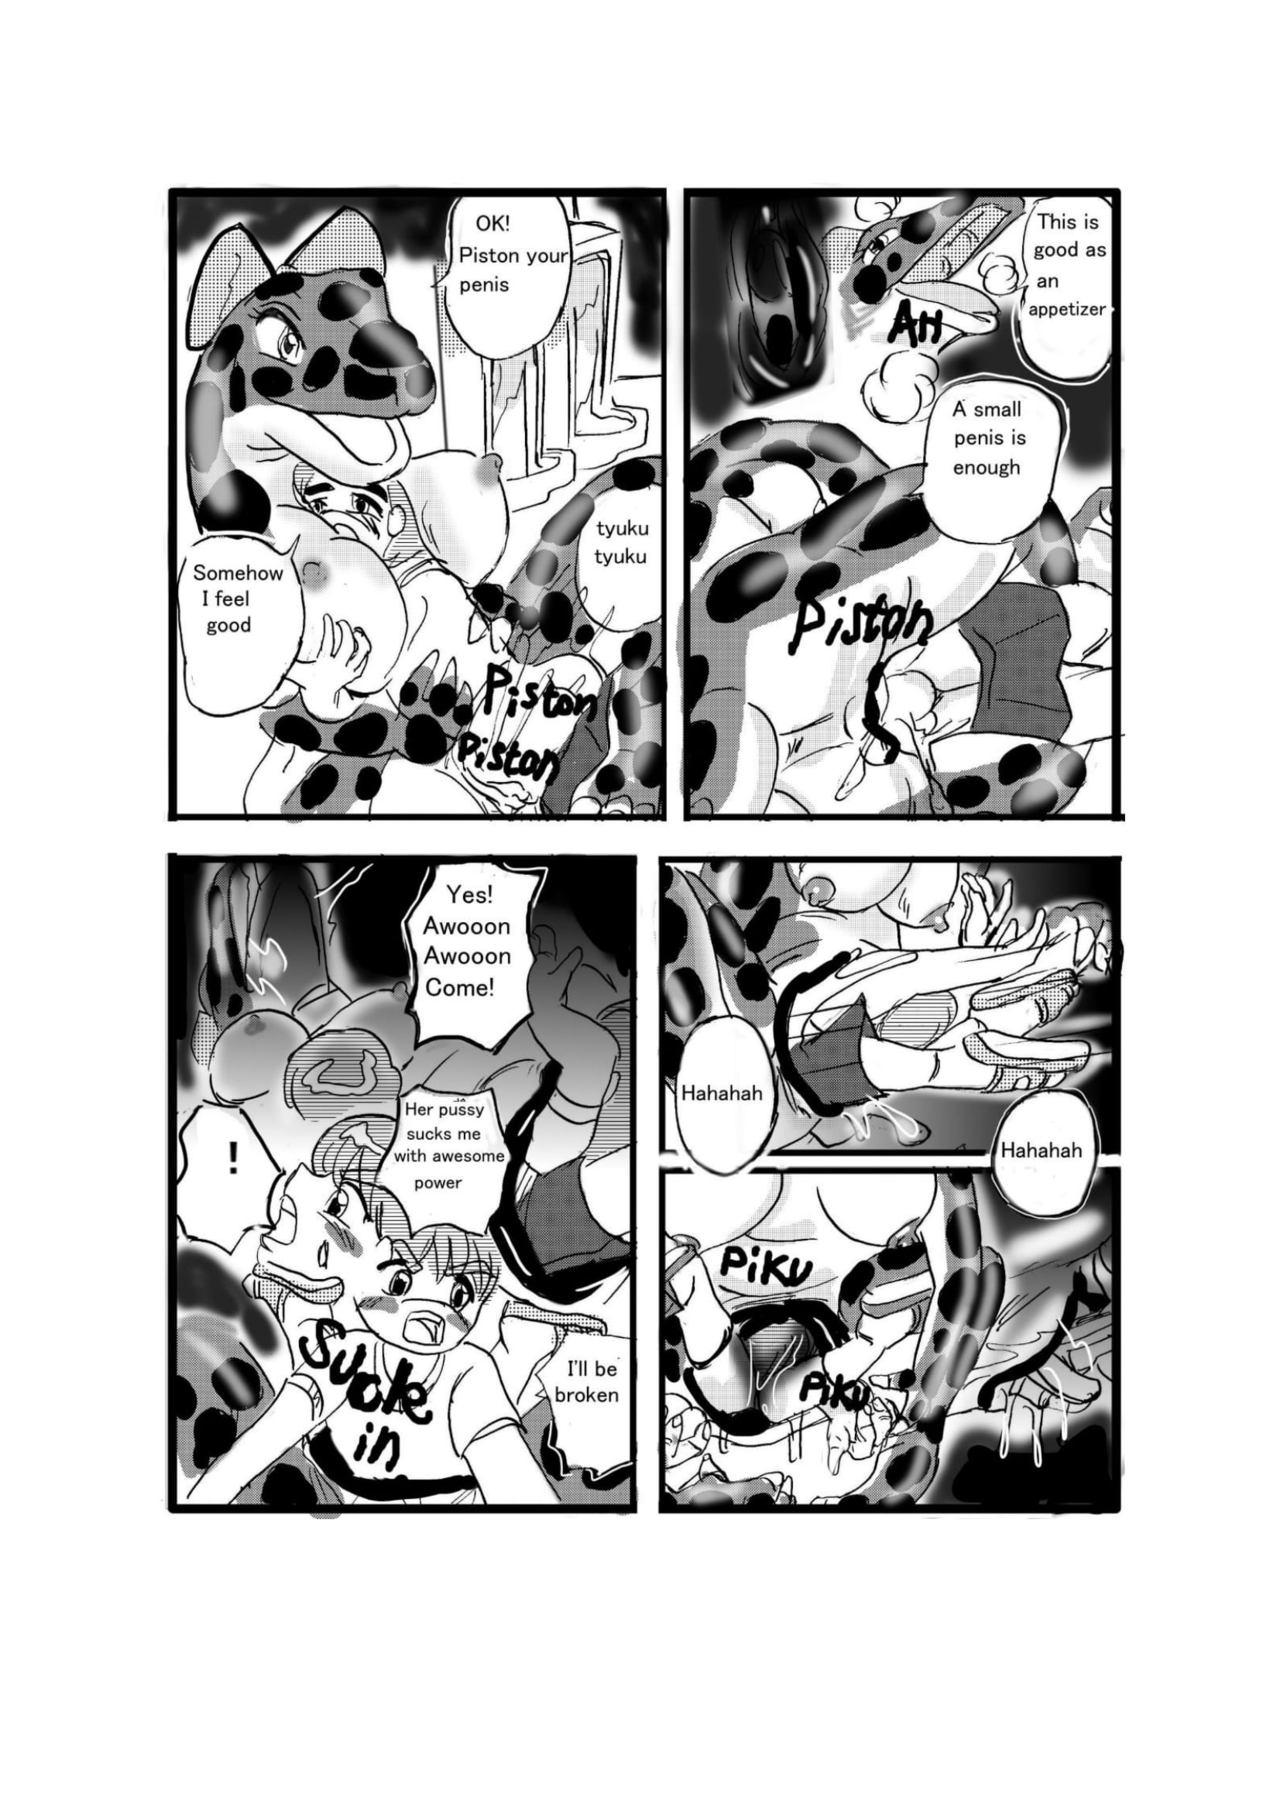 Plumper Swallowed Whole vol.2 Waniko + What's Digestion? - Original Hardcore Porn Free - Page 5